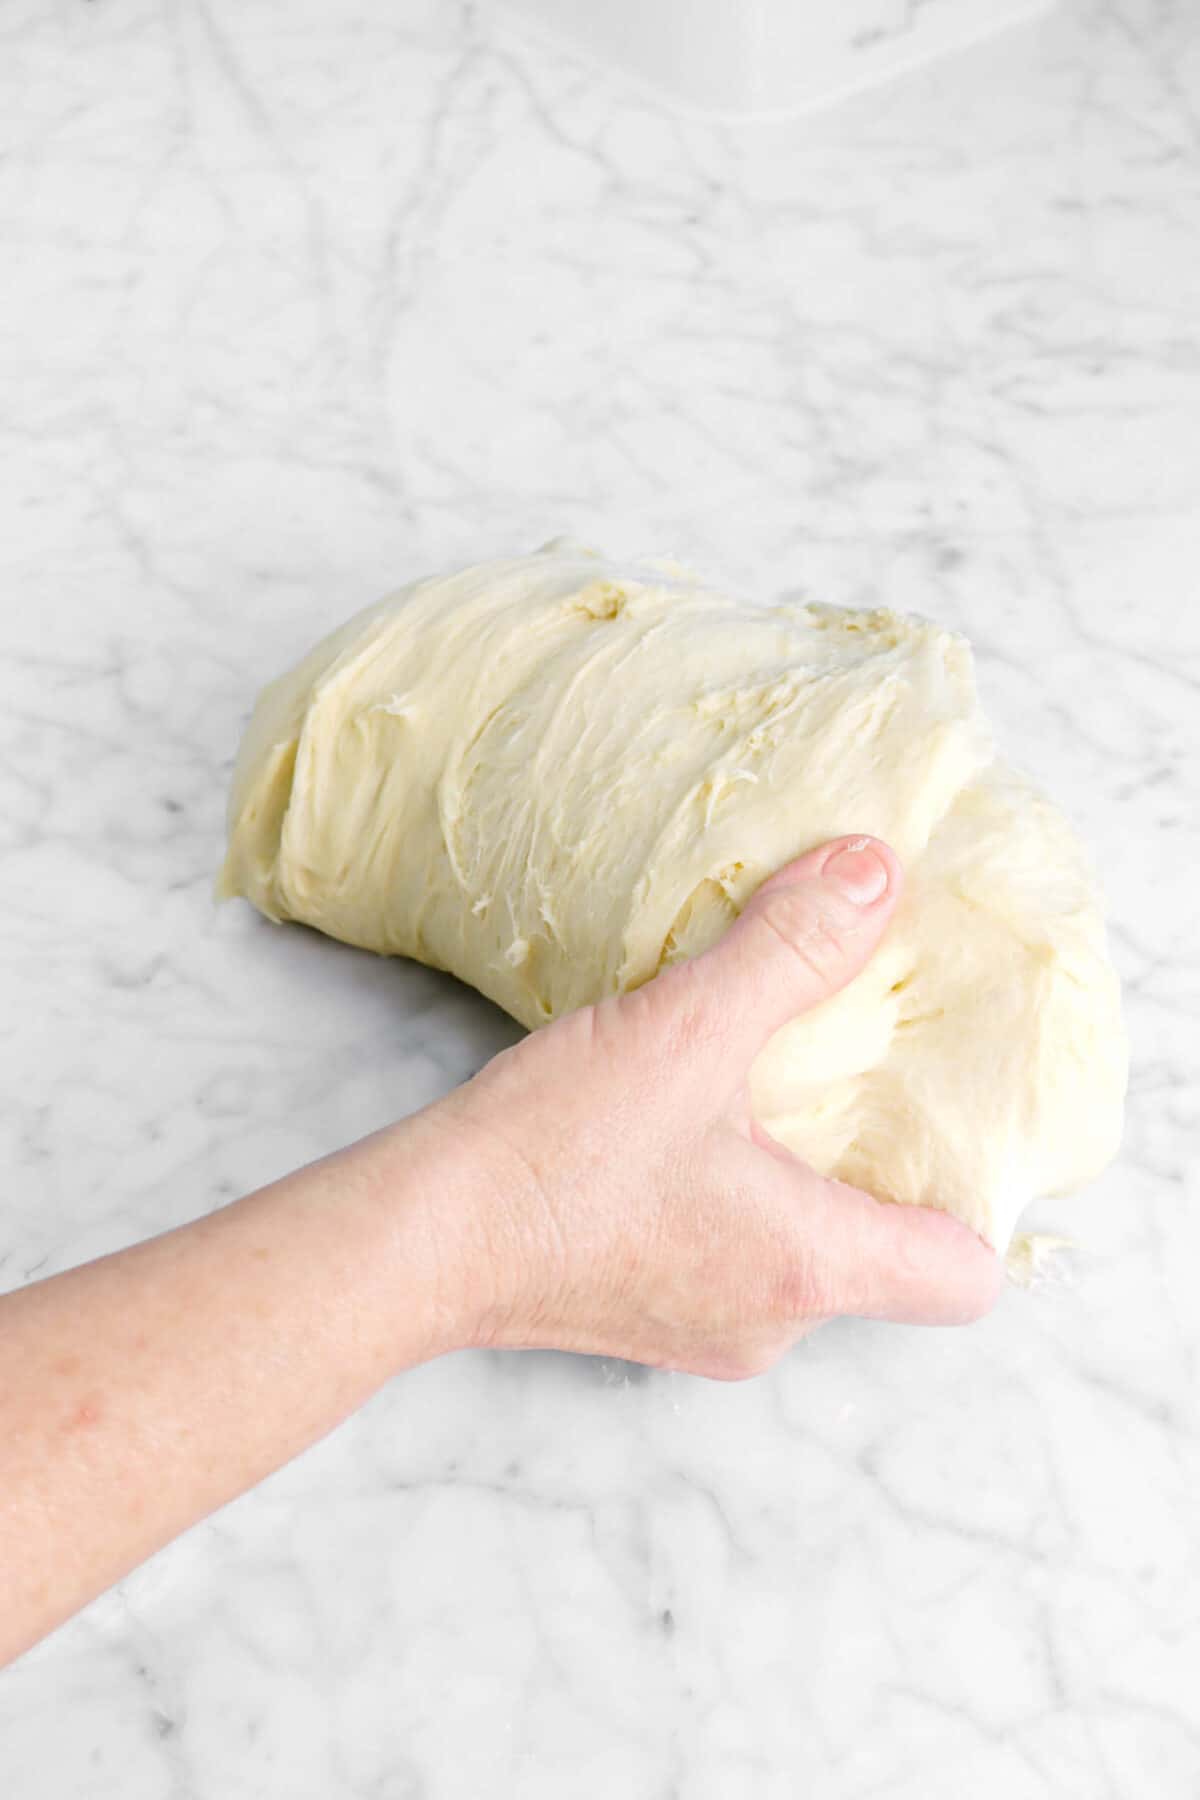 dough folded over with hand under it